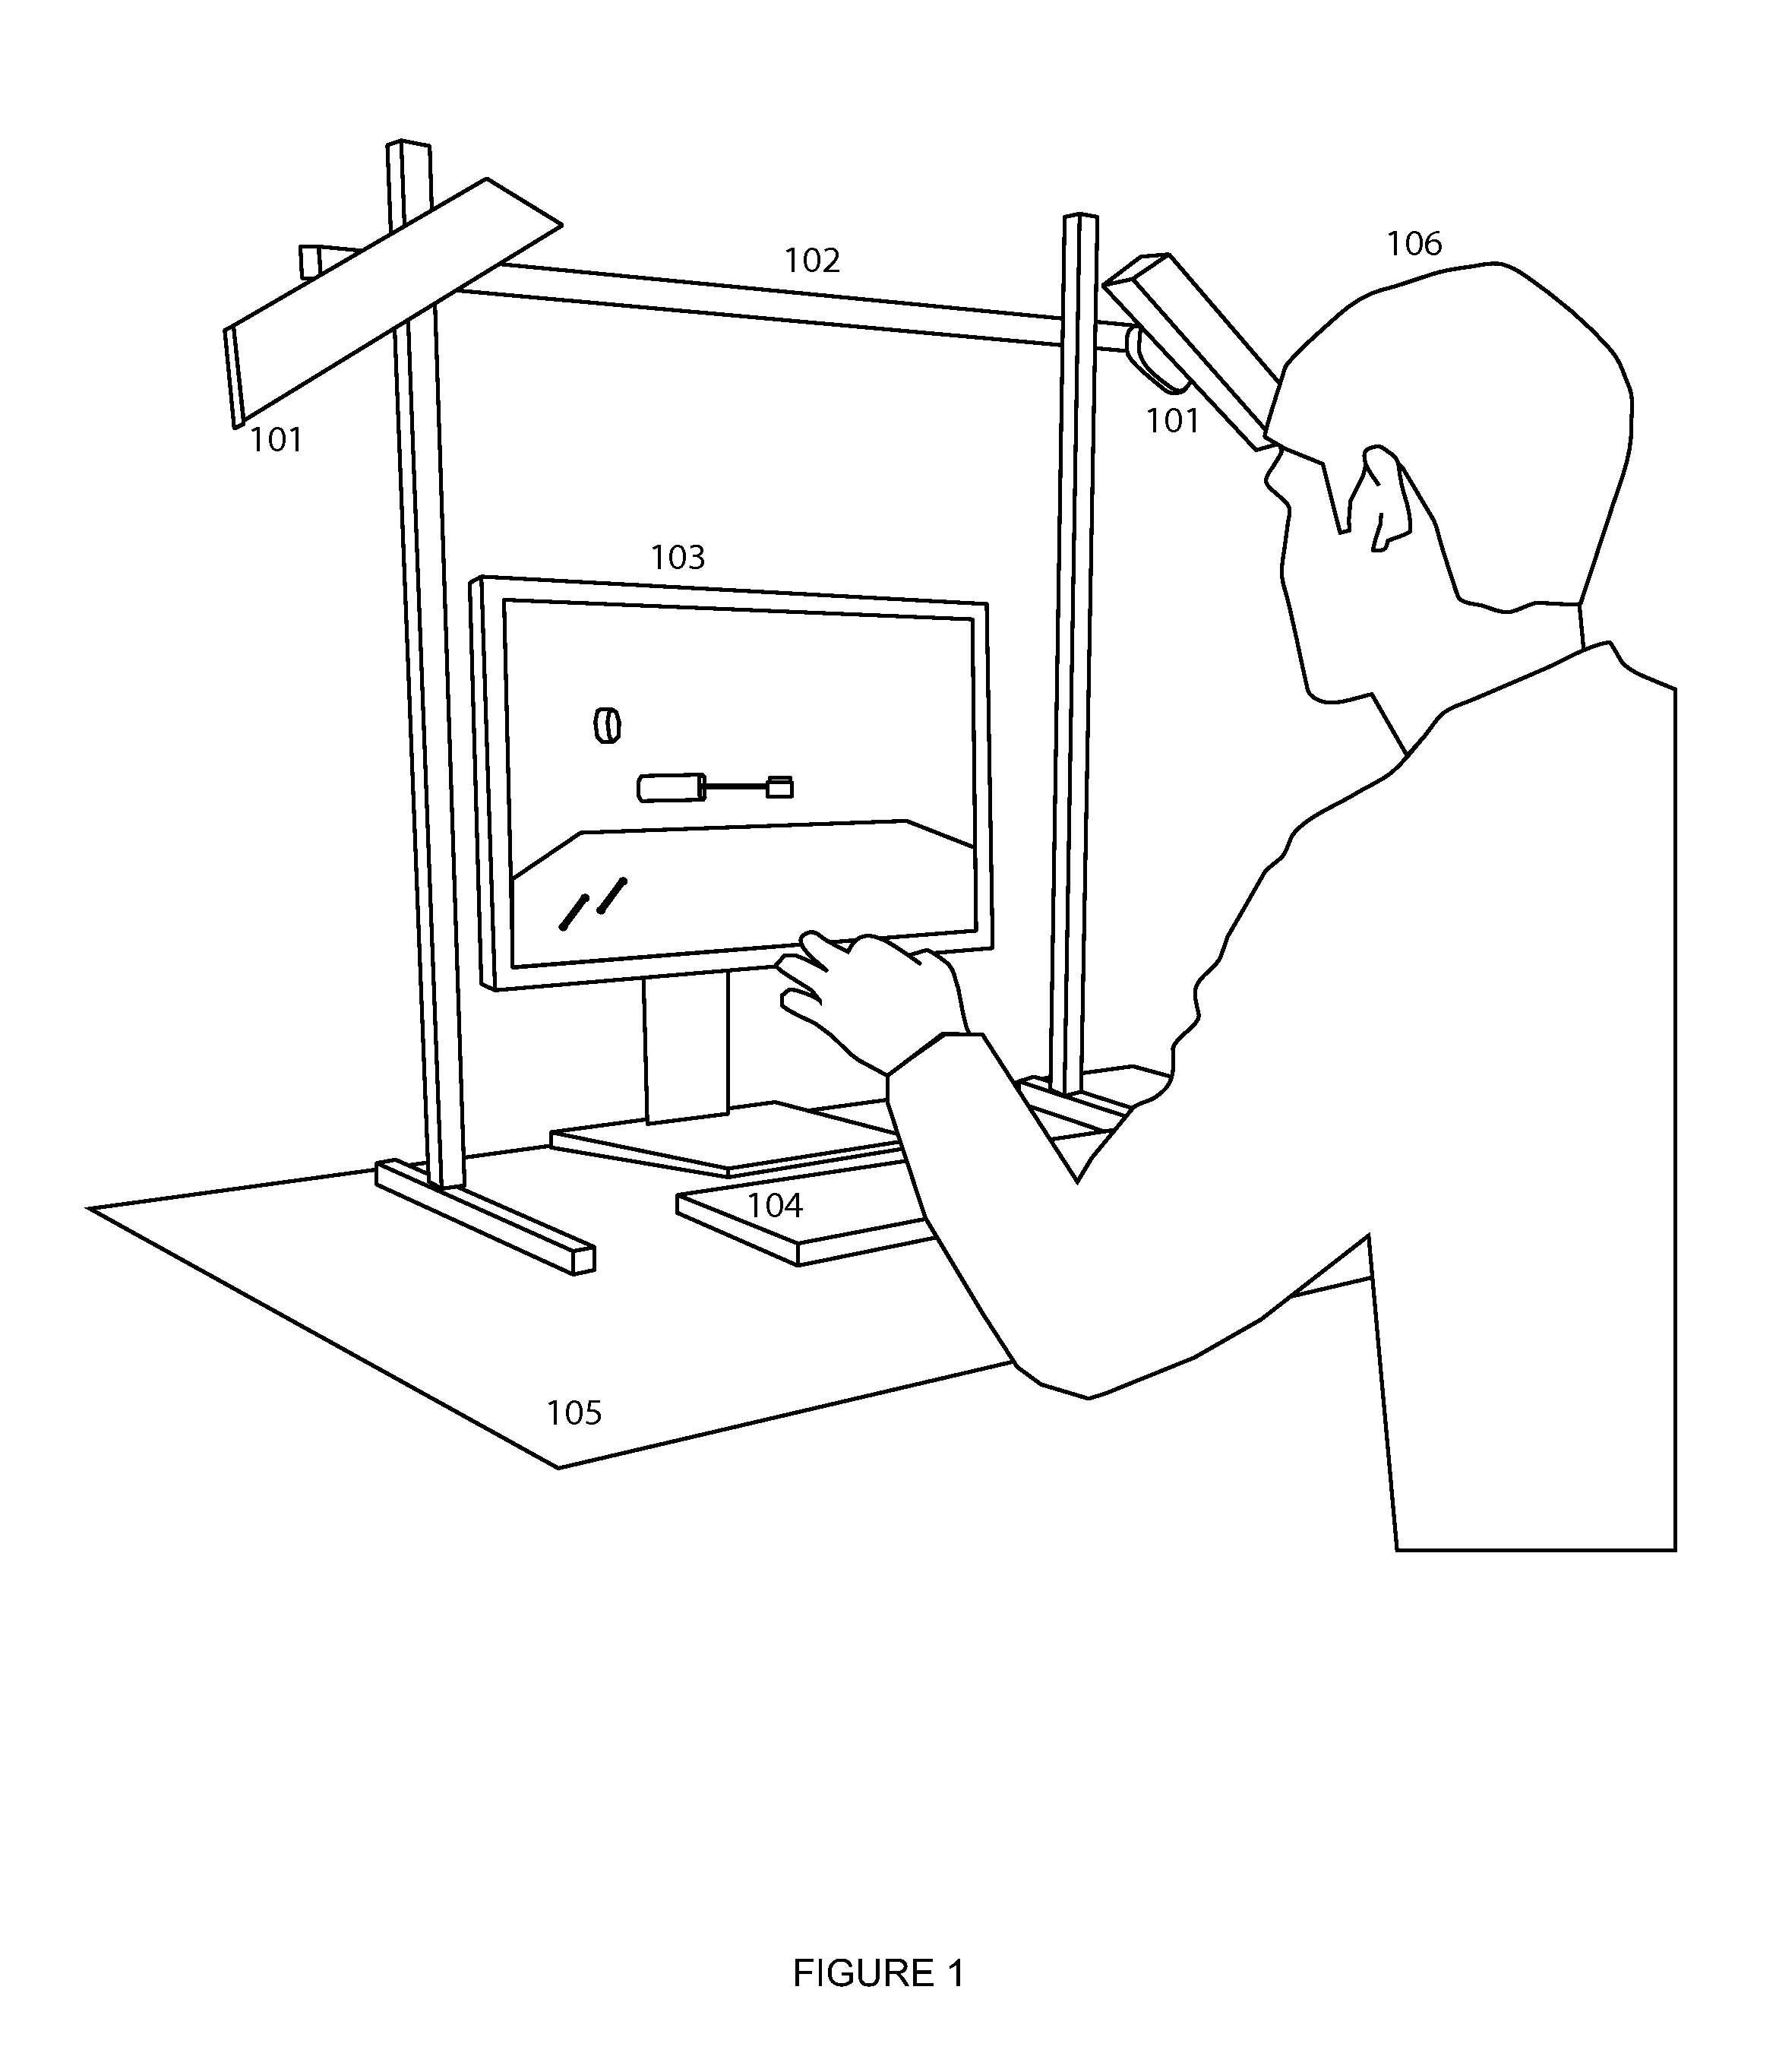 Gesture-based control system